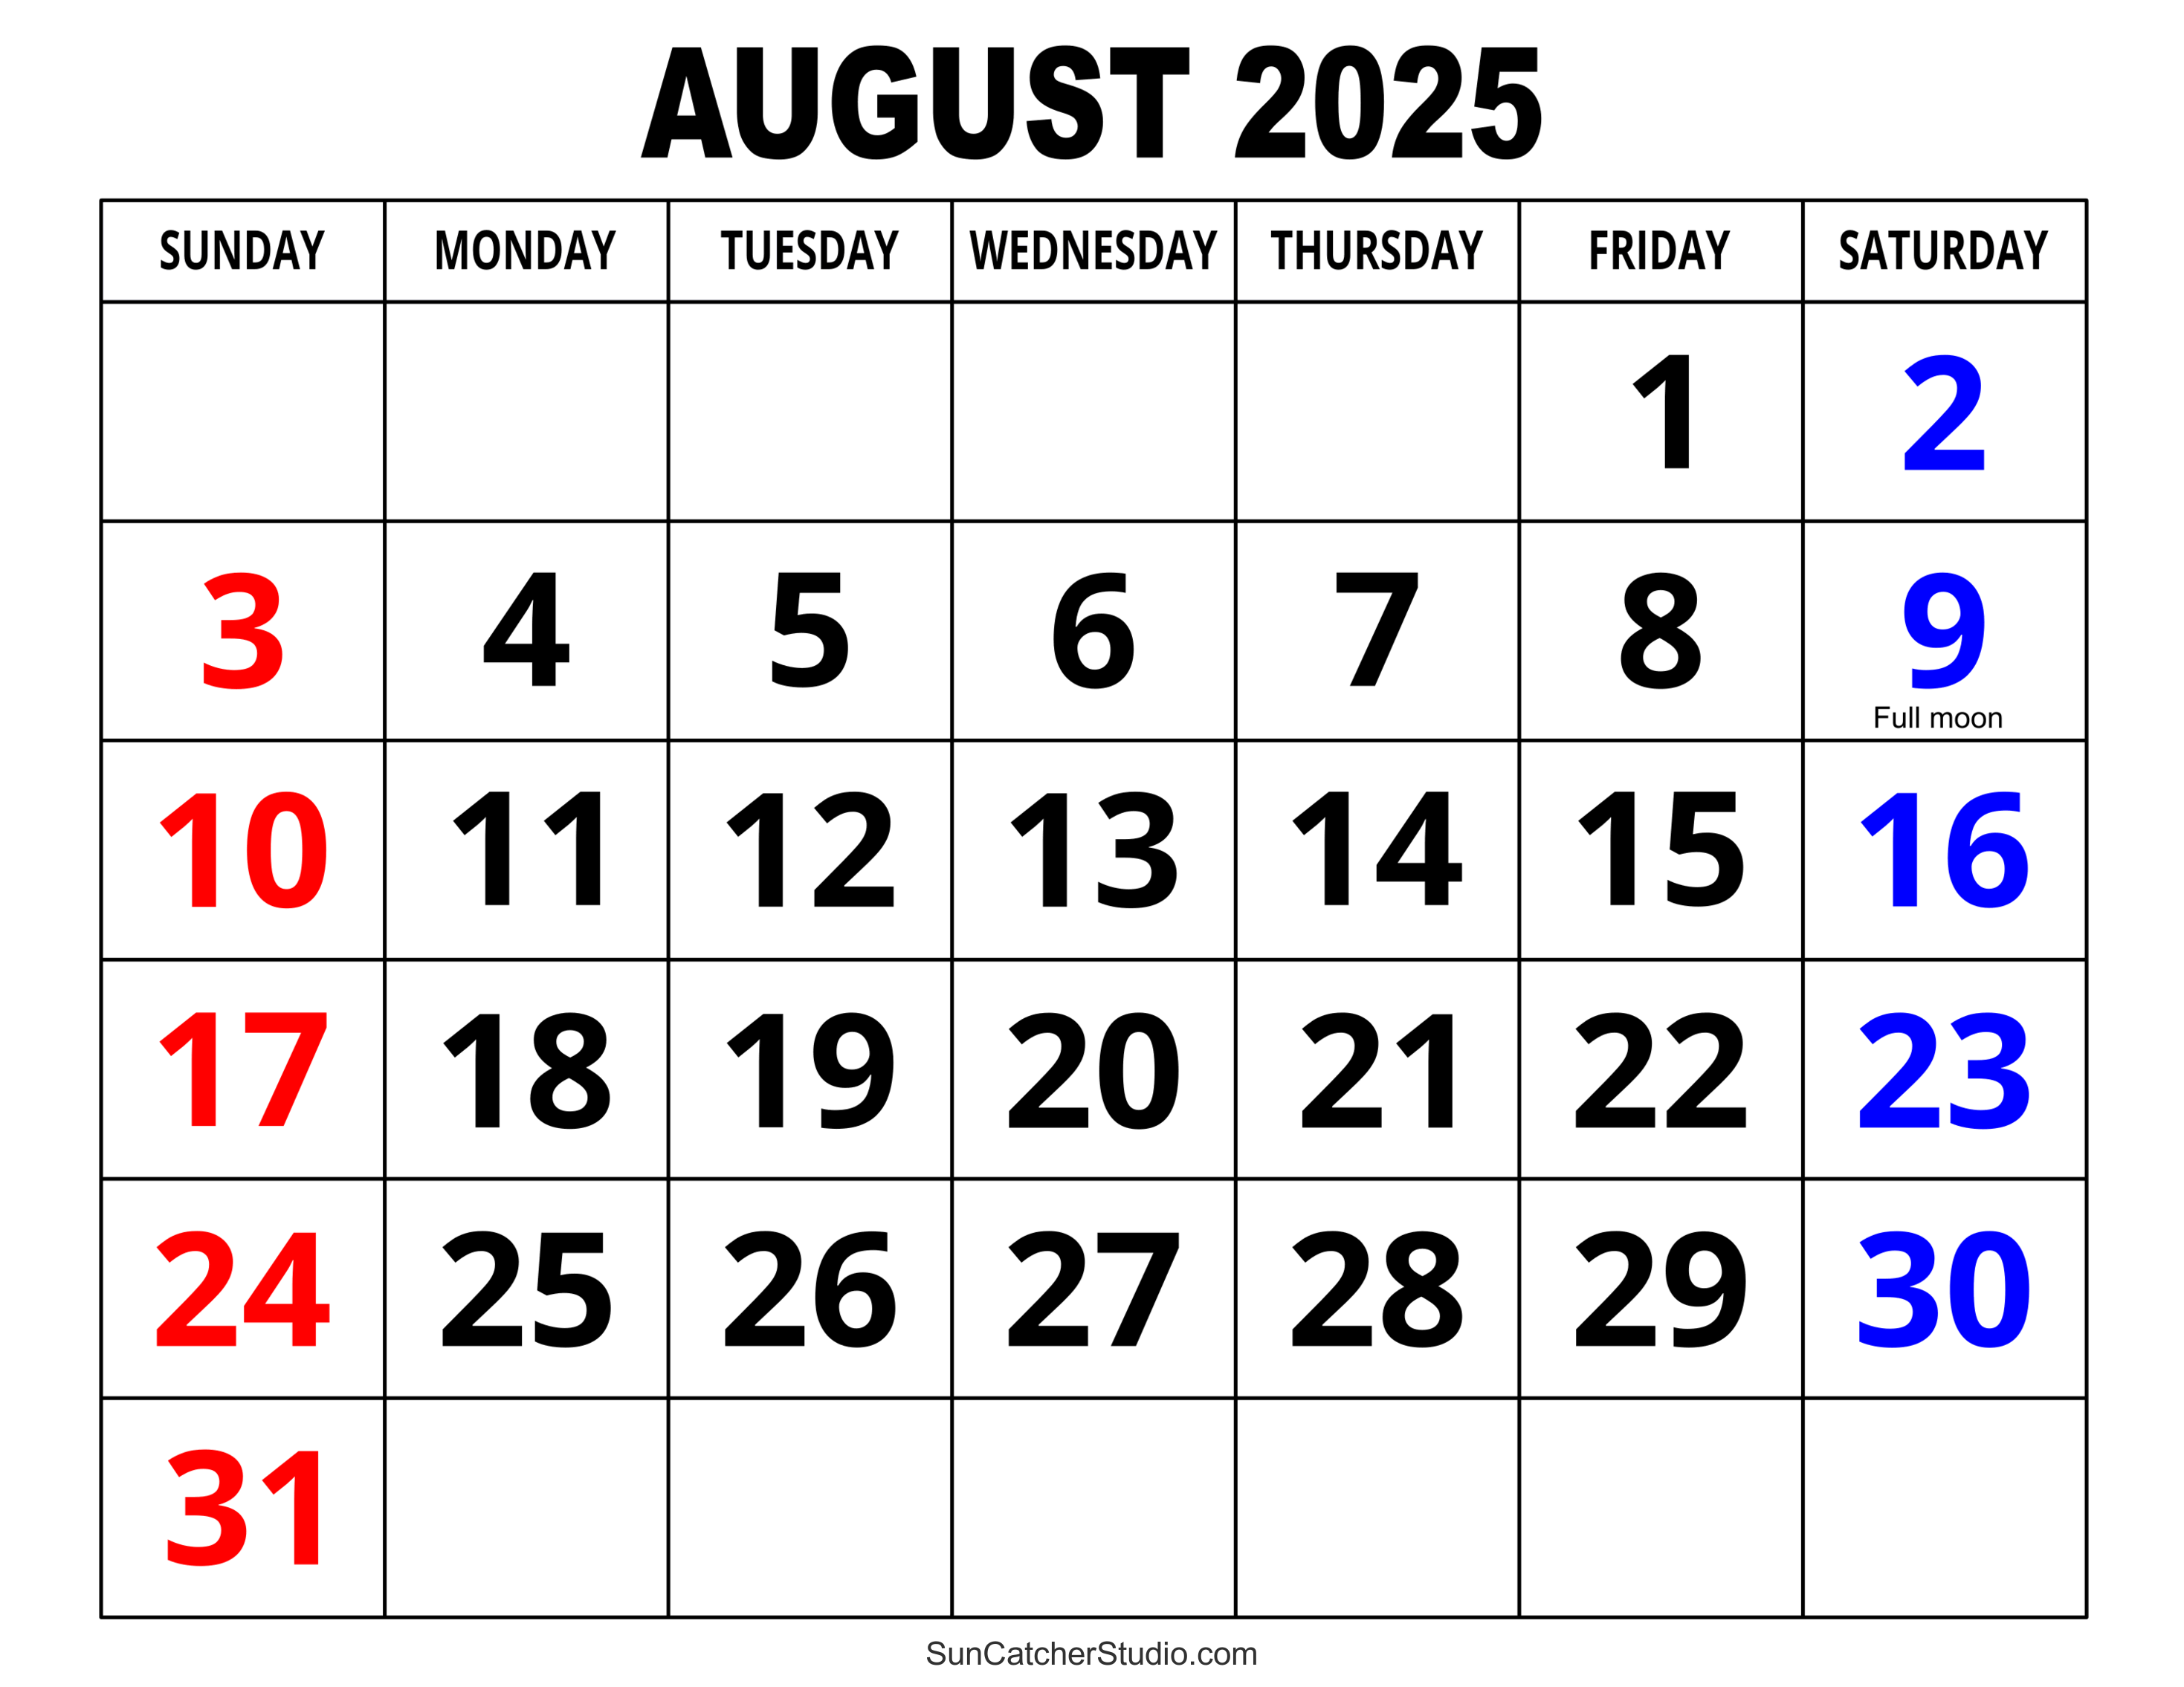 august-2025-calendar-free-printable-diy-projects-patterns